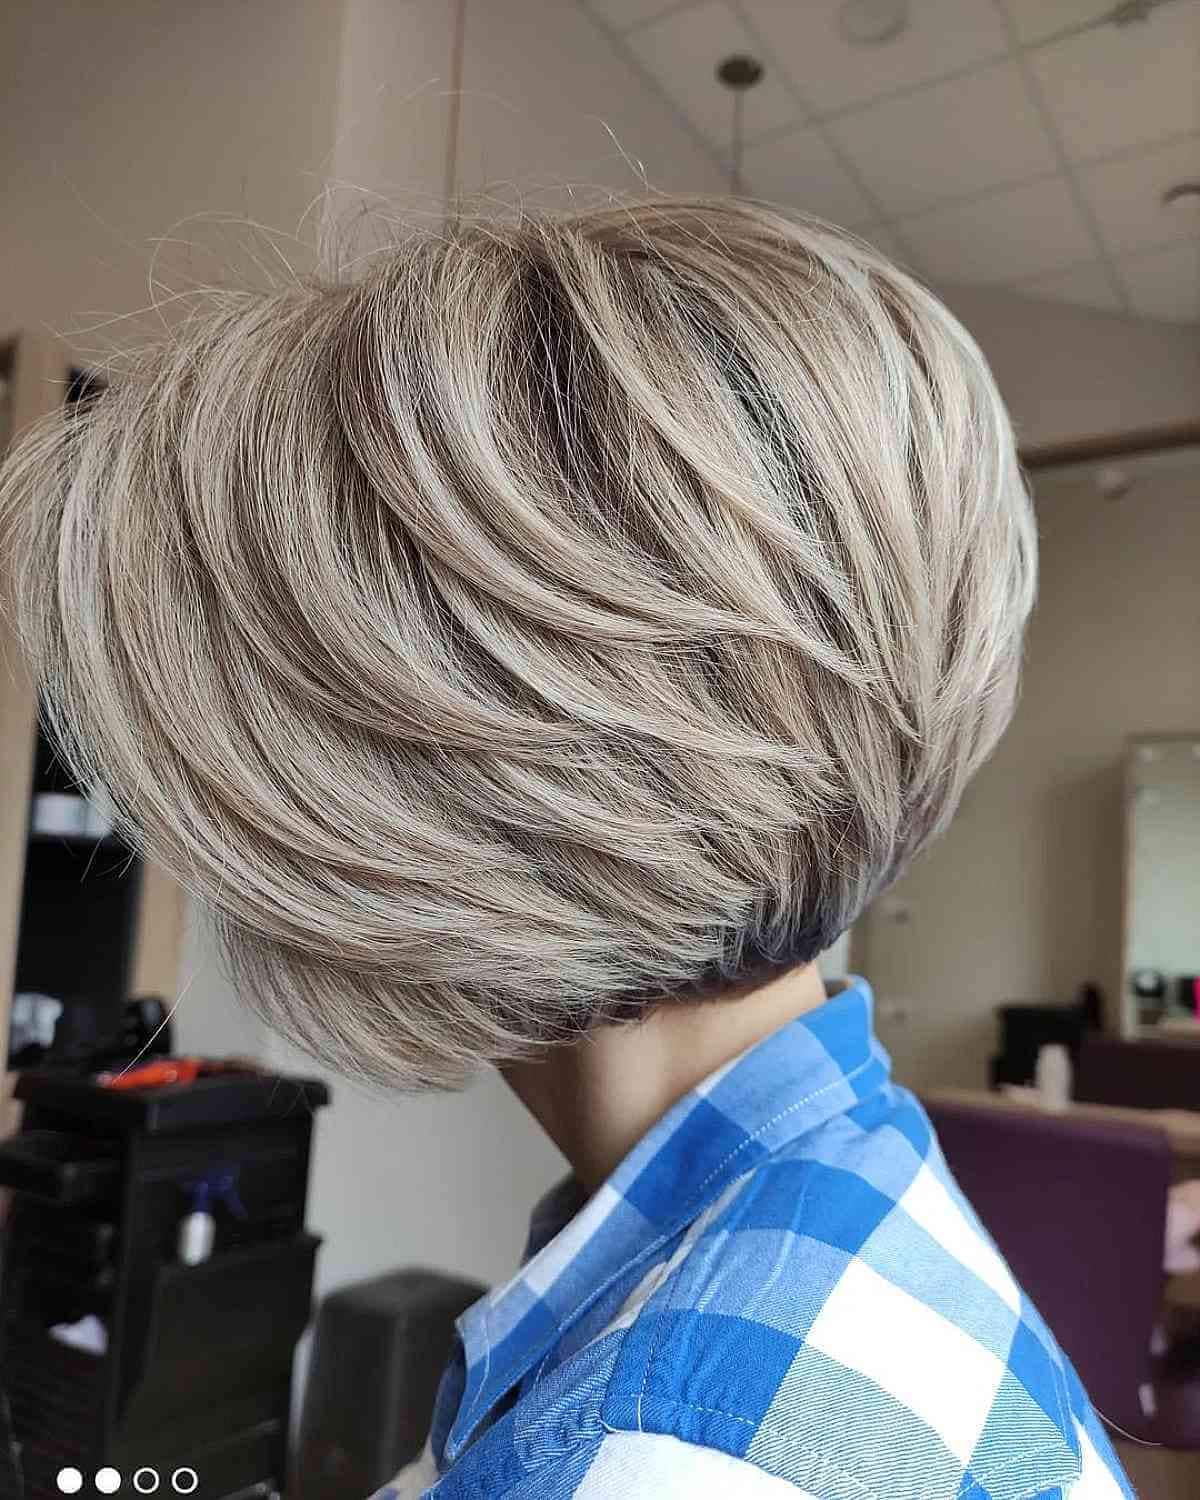 Pin on Cute hairstyles